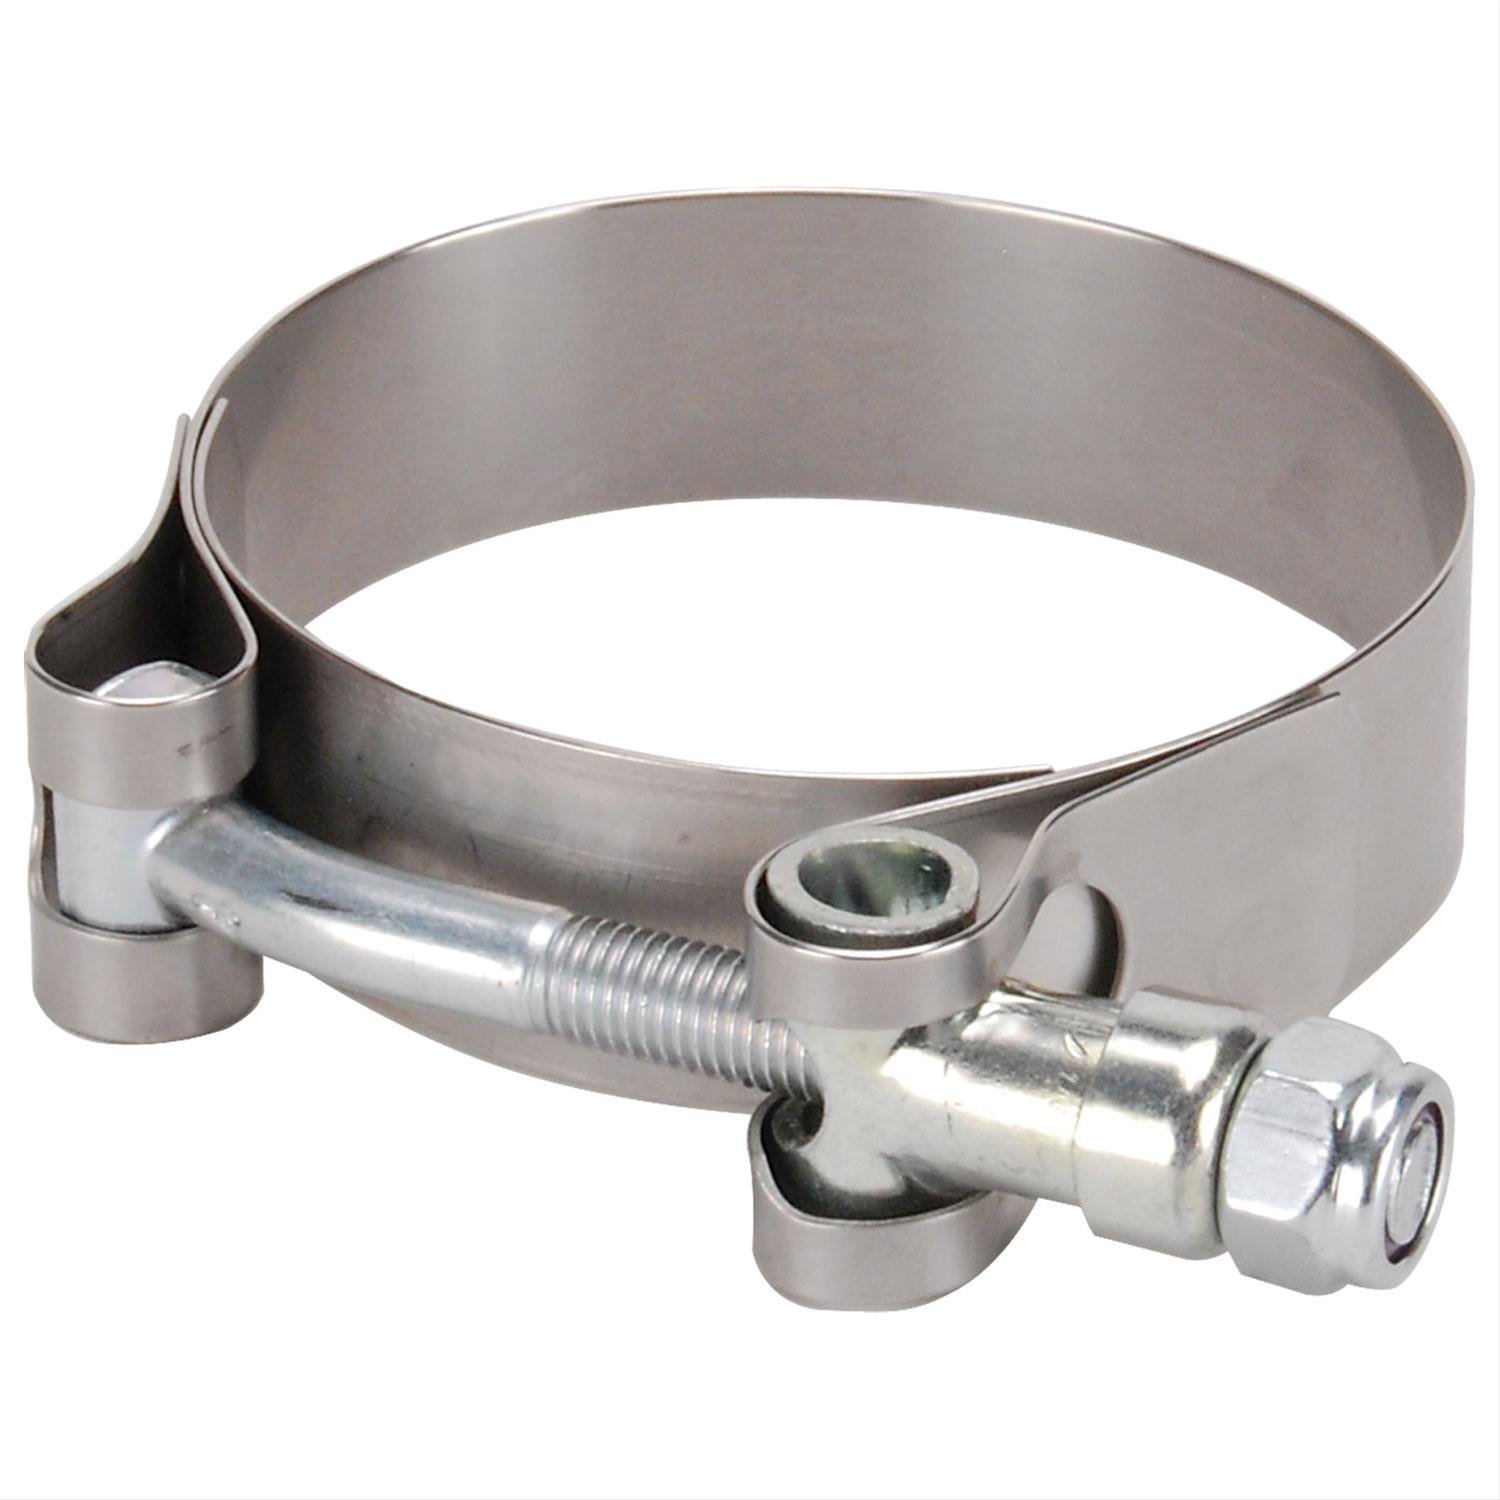 Stainless Steel Wideband T-Bar Clamp Diameter: 2.25" to 2.56"